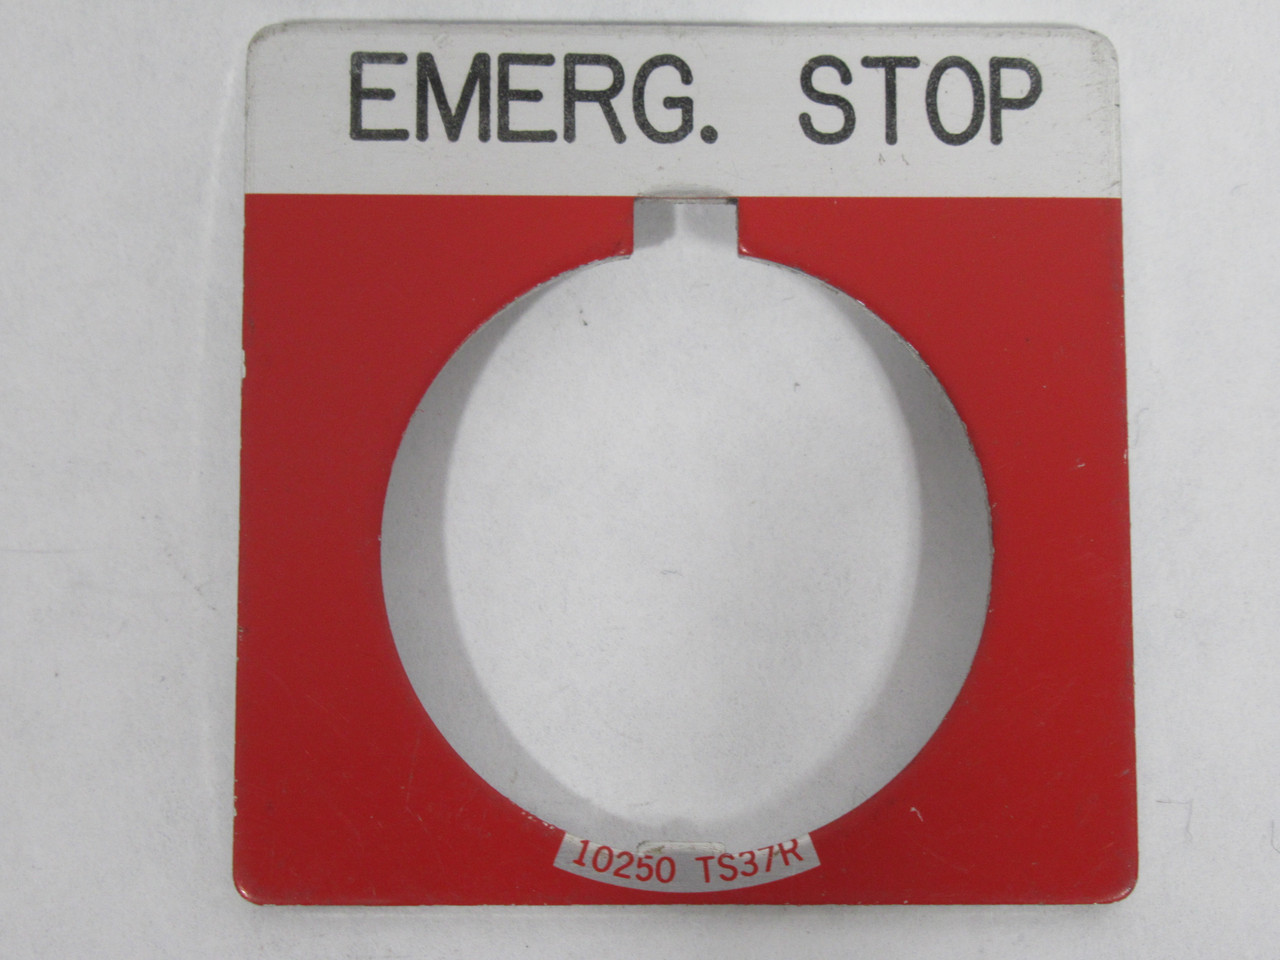 Cutler-Hammer Eaton 10250TS37RSTAMP Push Button Legend Plate EMERG. STOP USED